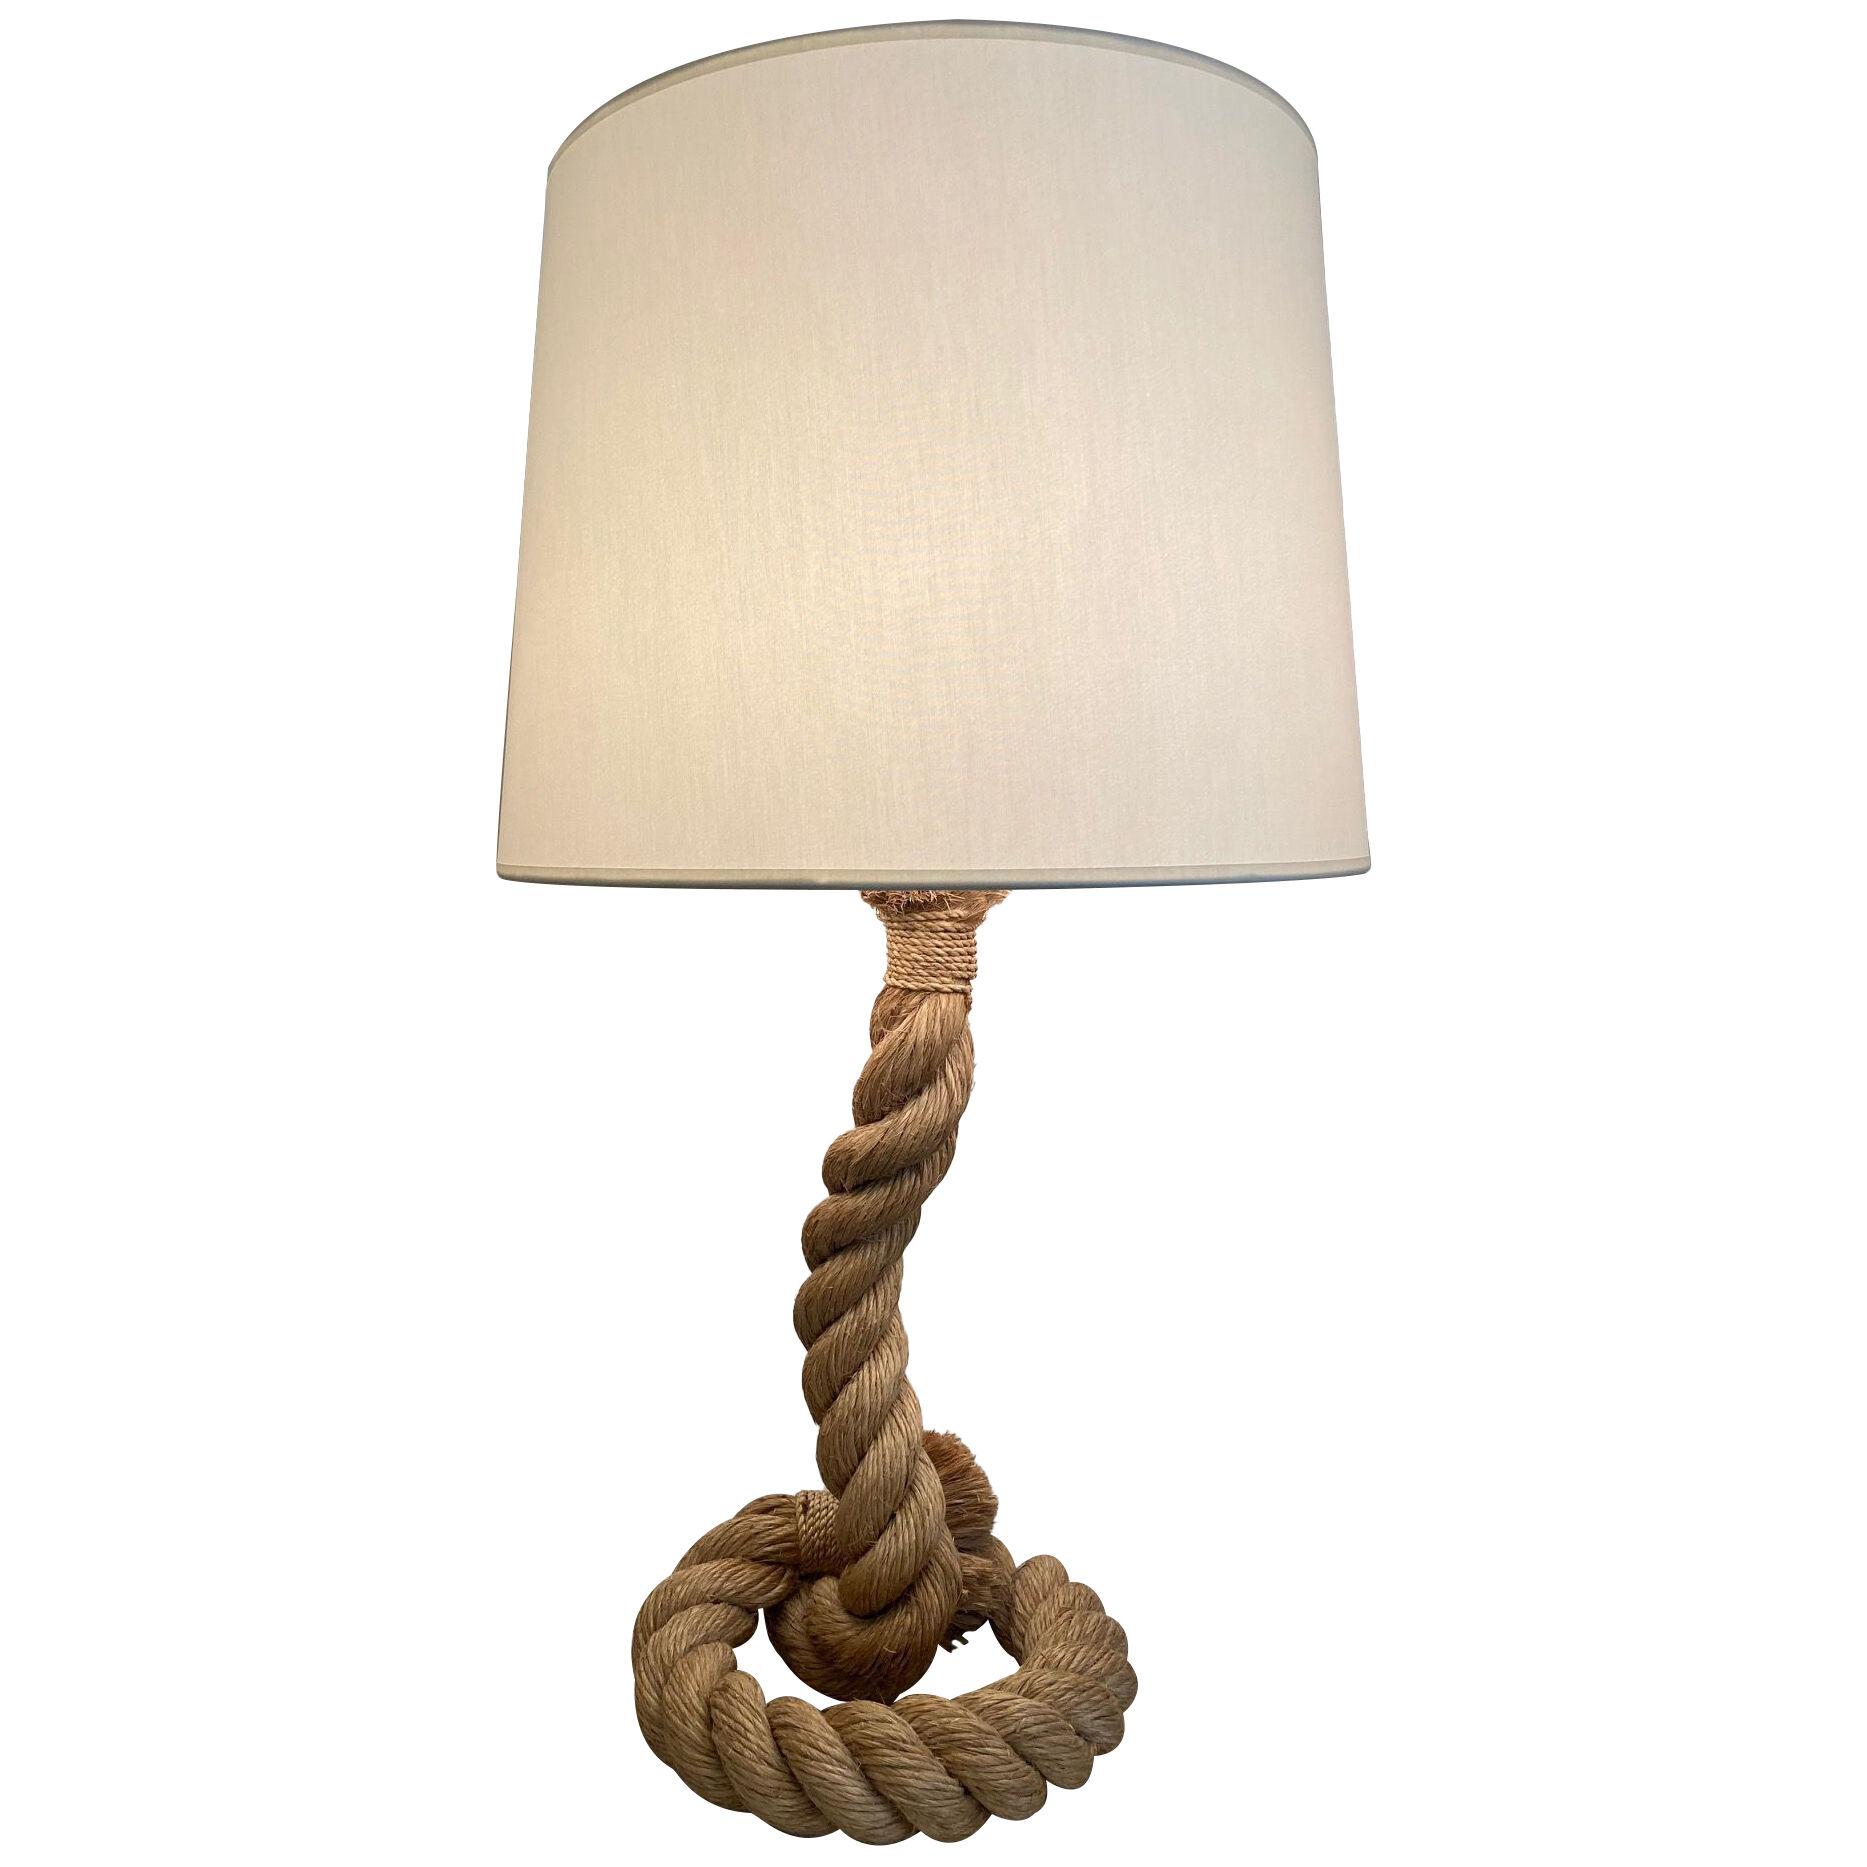  Rope Lamp by Audoux-Minet